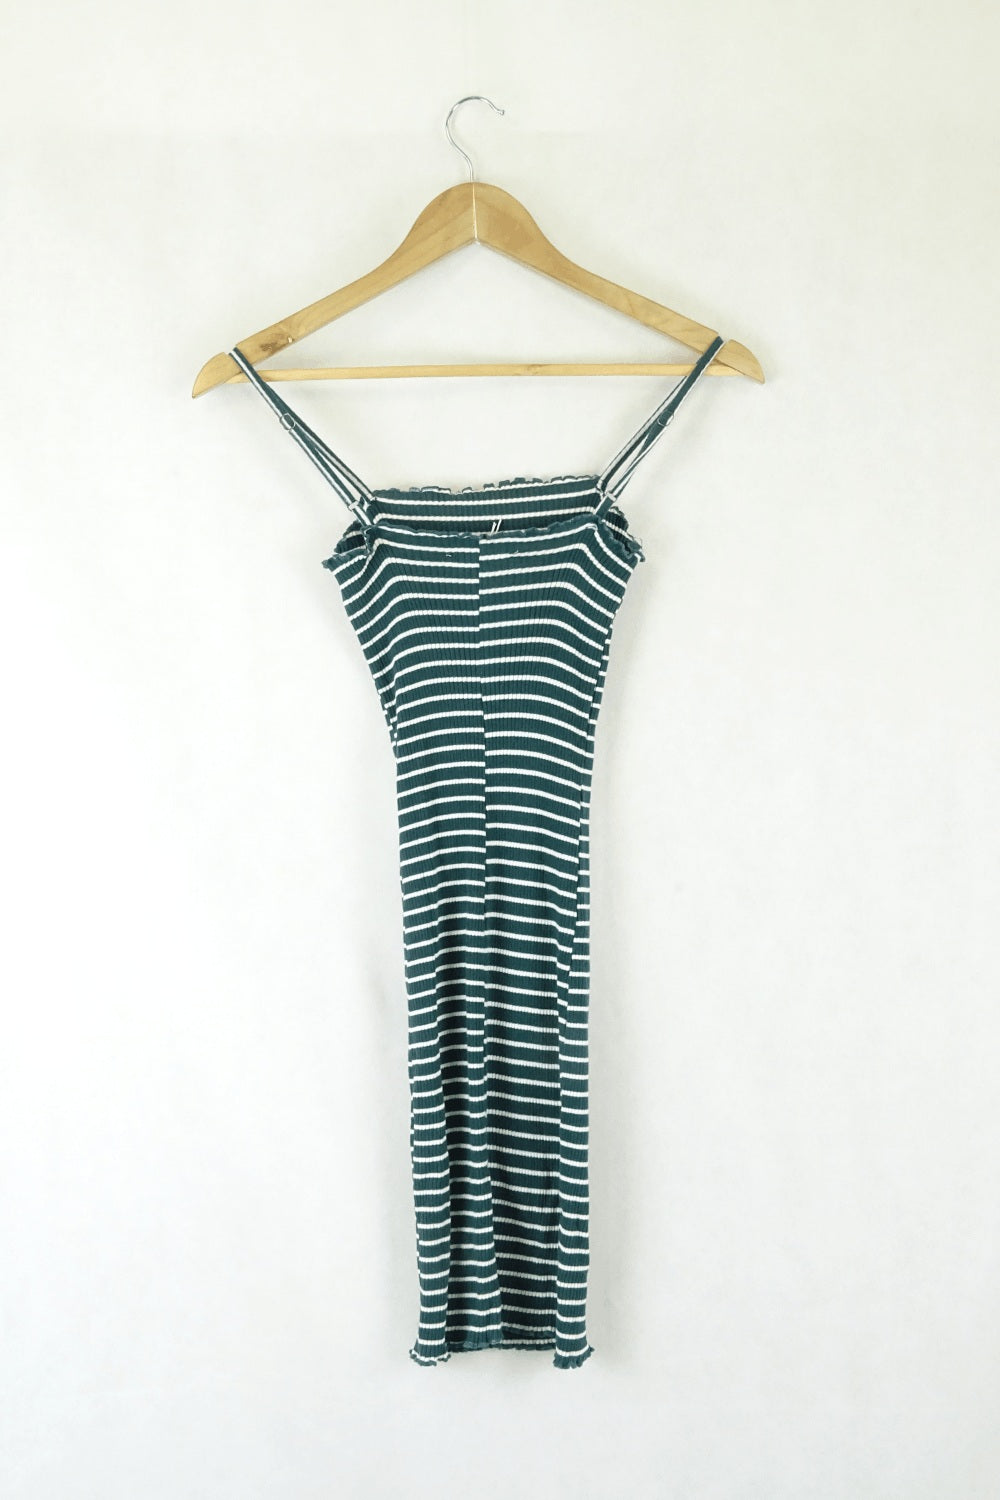 Pare Basic Striped White And Green Dress 6